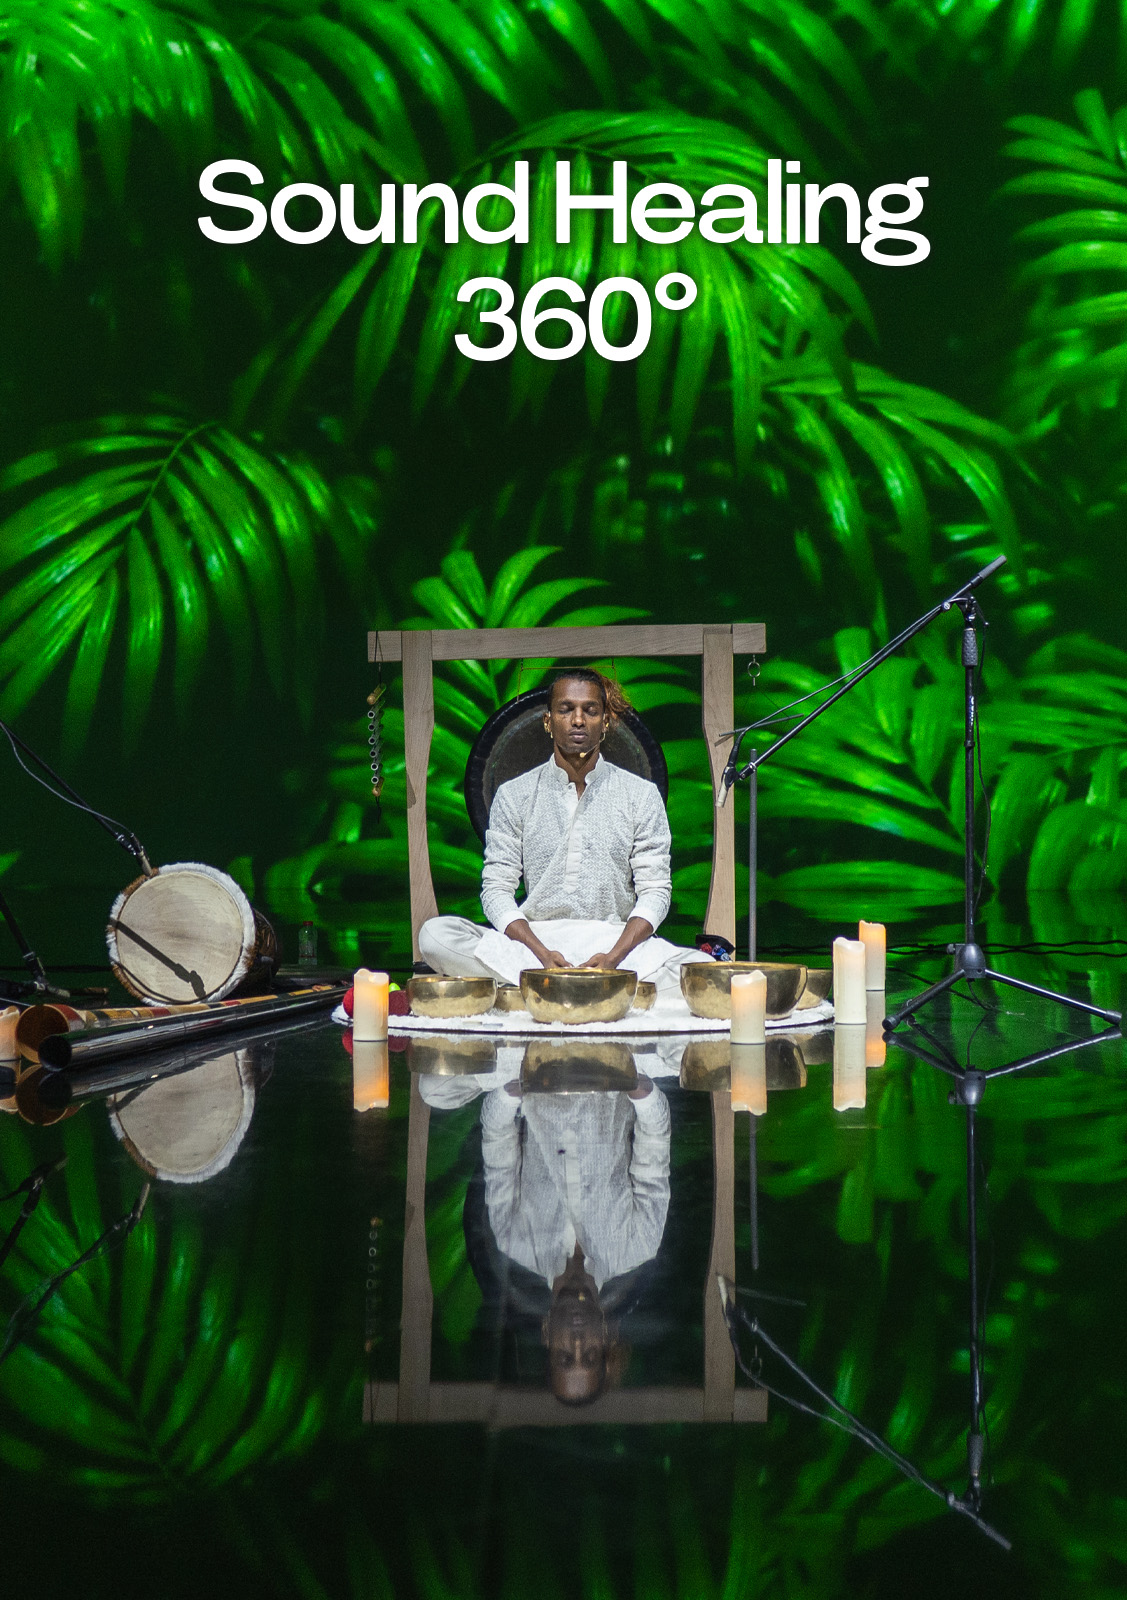 Sound Healing 360°Sounds do have a power to alter our reality.